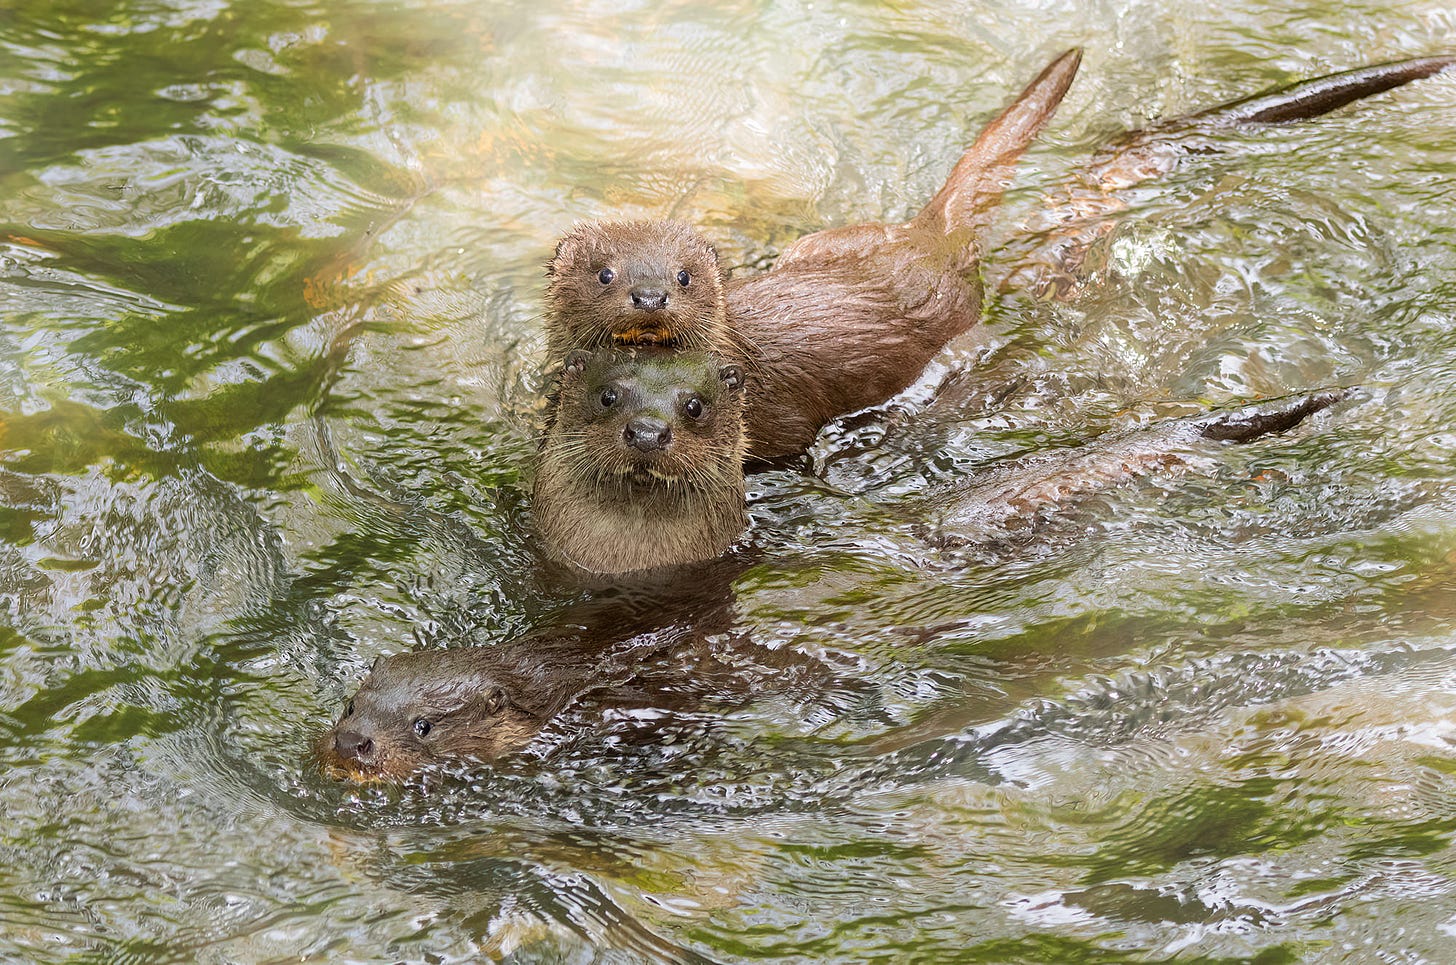 Female otter with two cubs in a river, photographed by Rhiannon Law